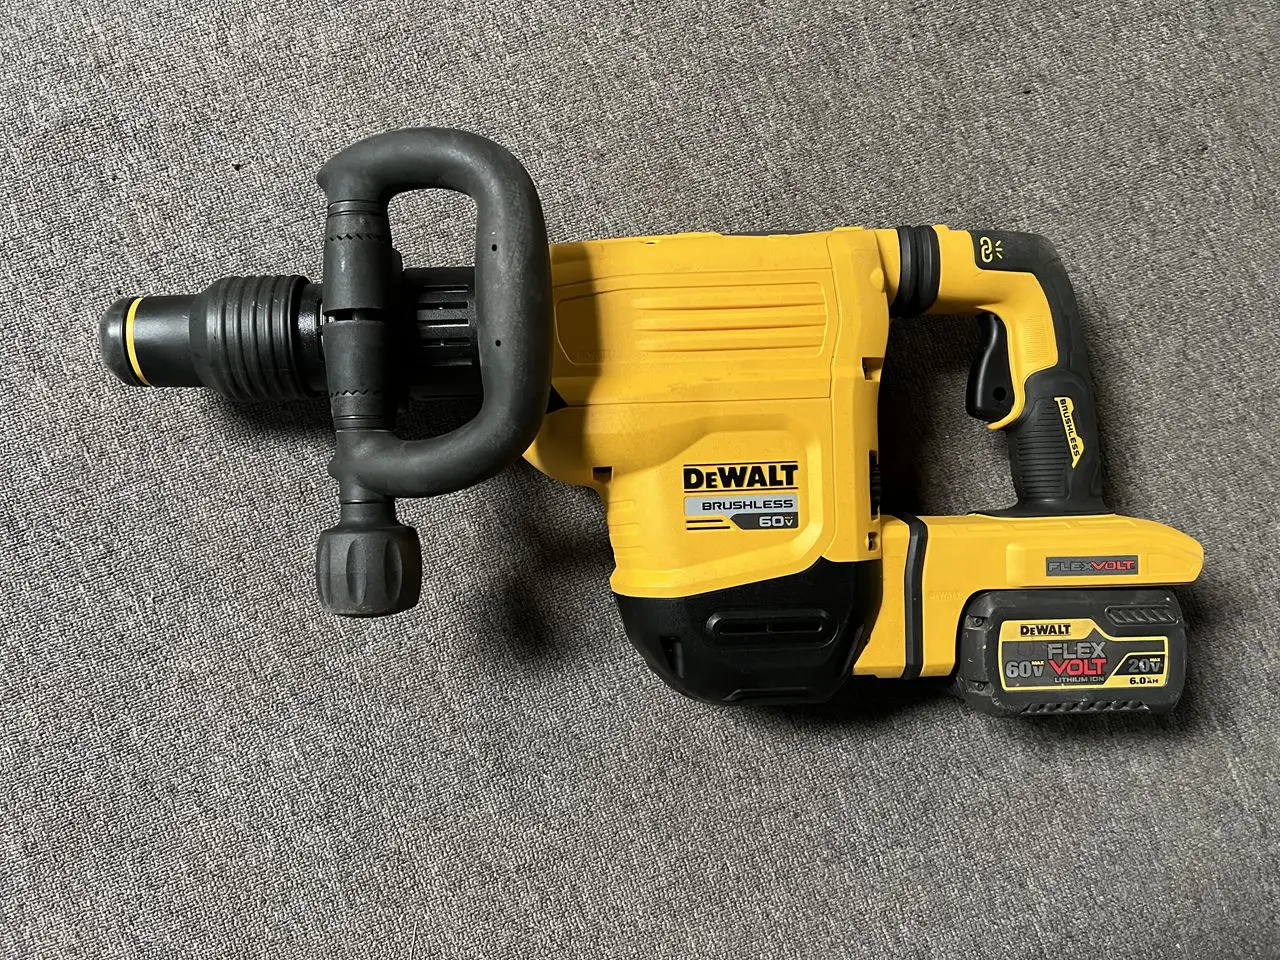 

DeWALT DCH832 60V SDS MAX Cordless Lithium-Ion Chipping 6.0AH battery second-hand